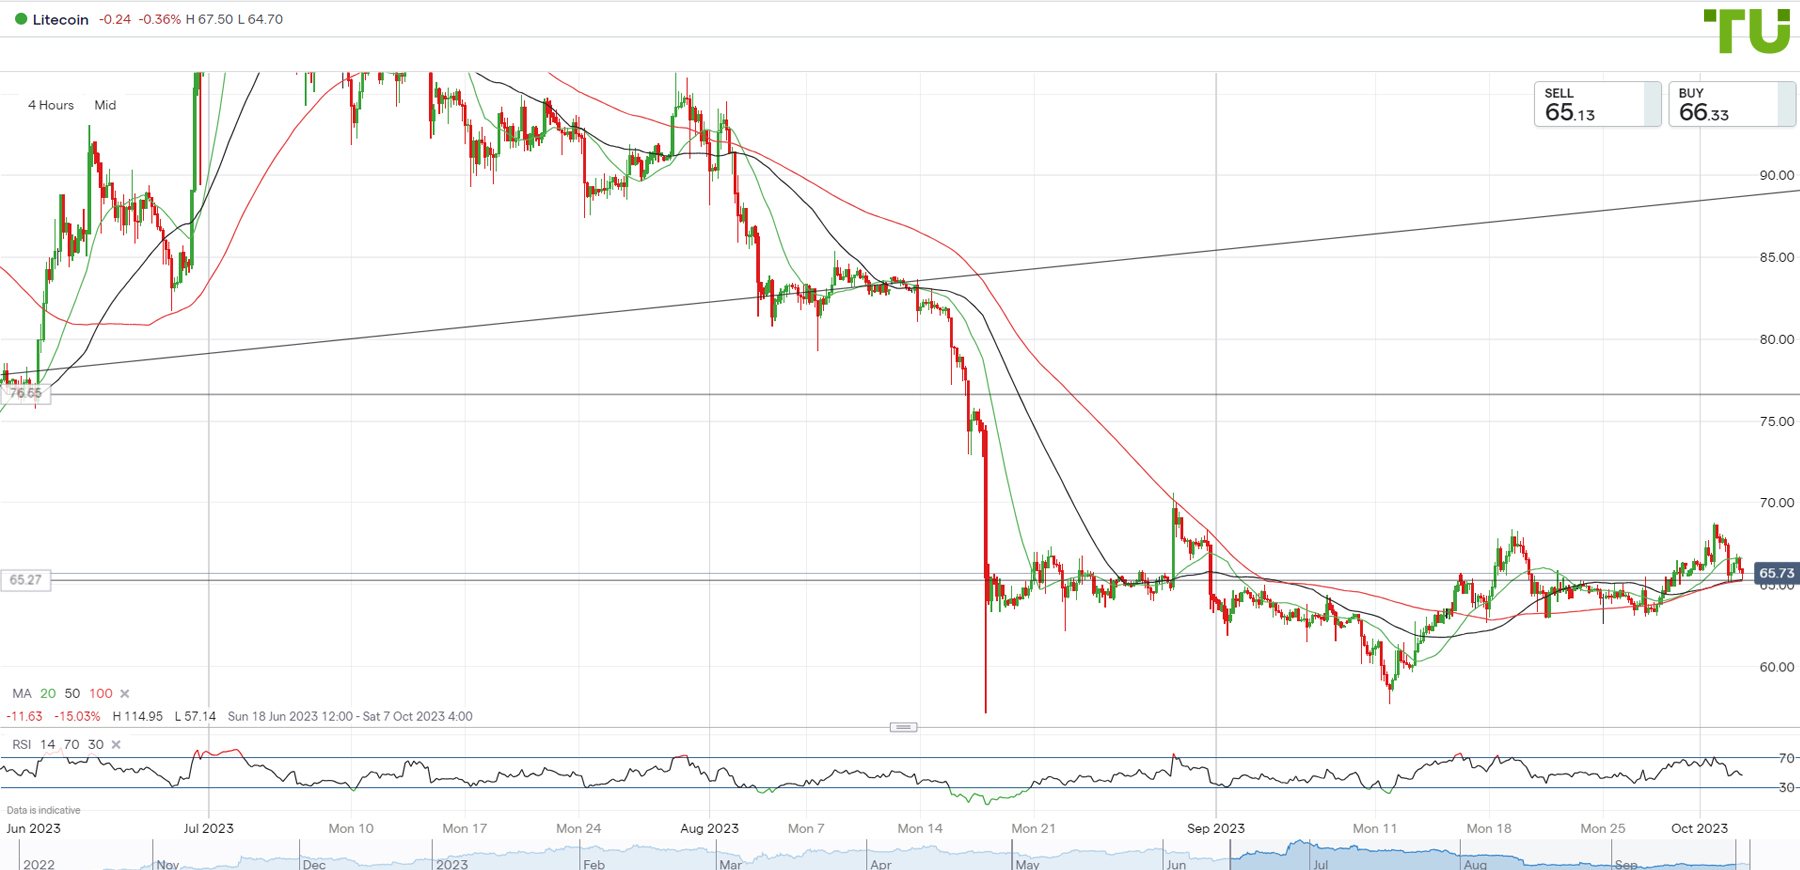 LTC/USD is declining after rising